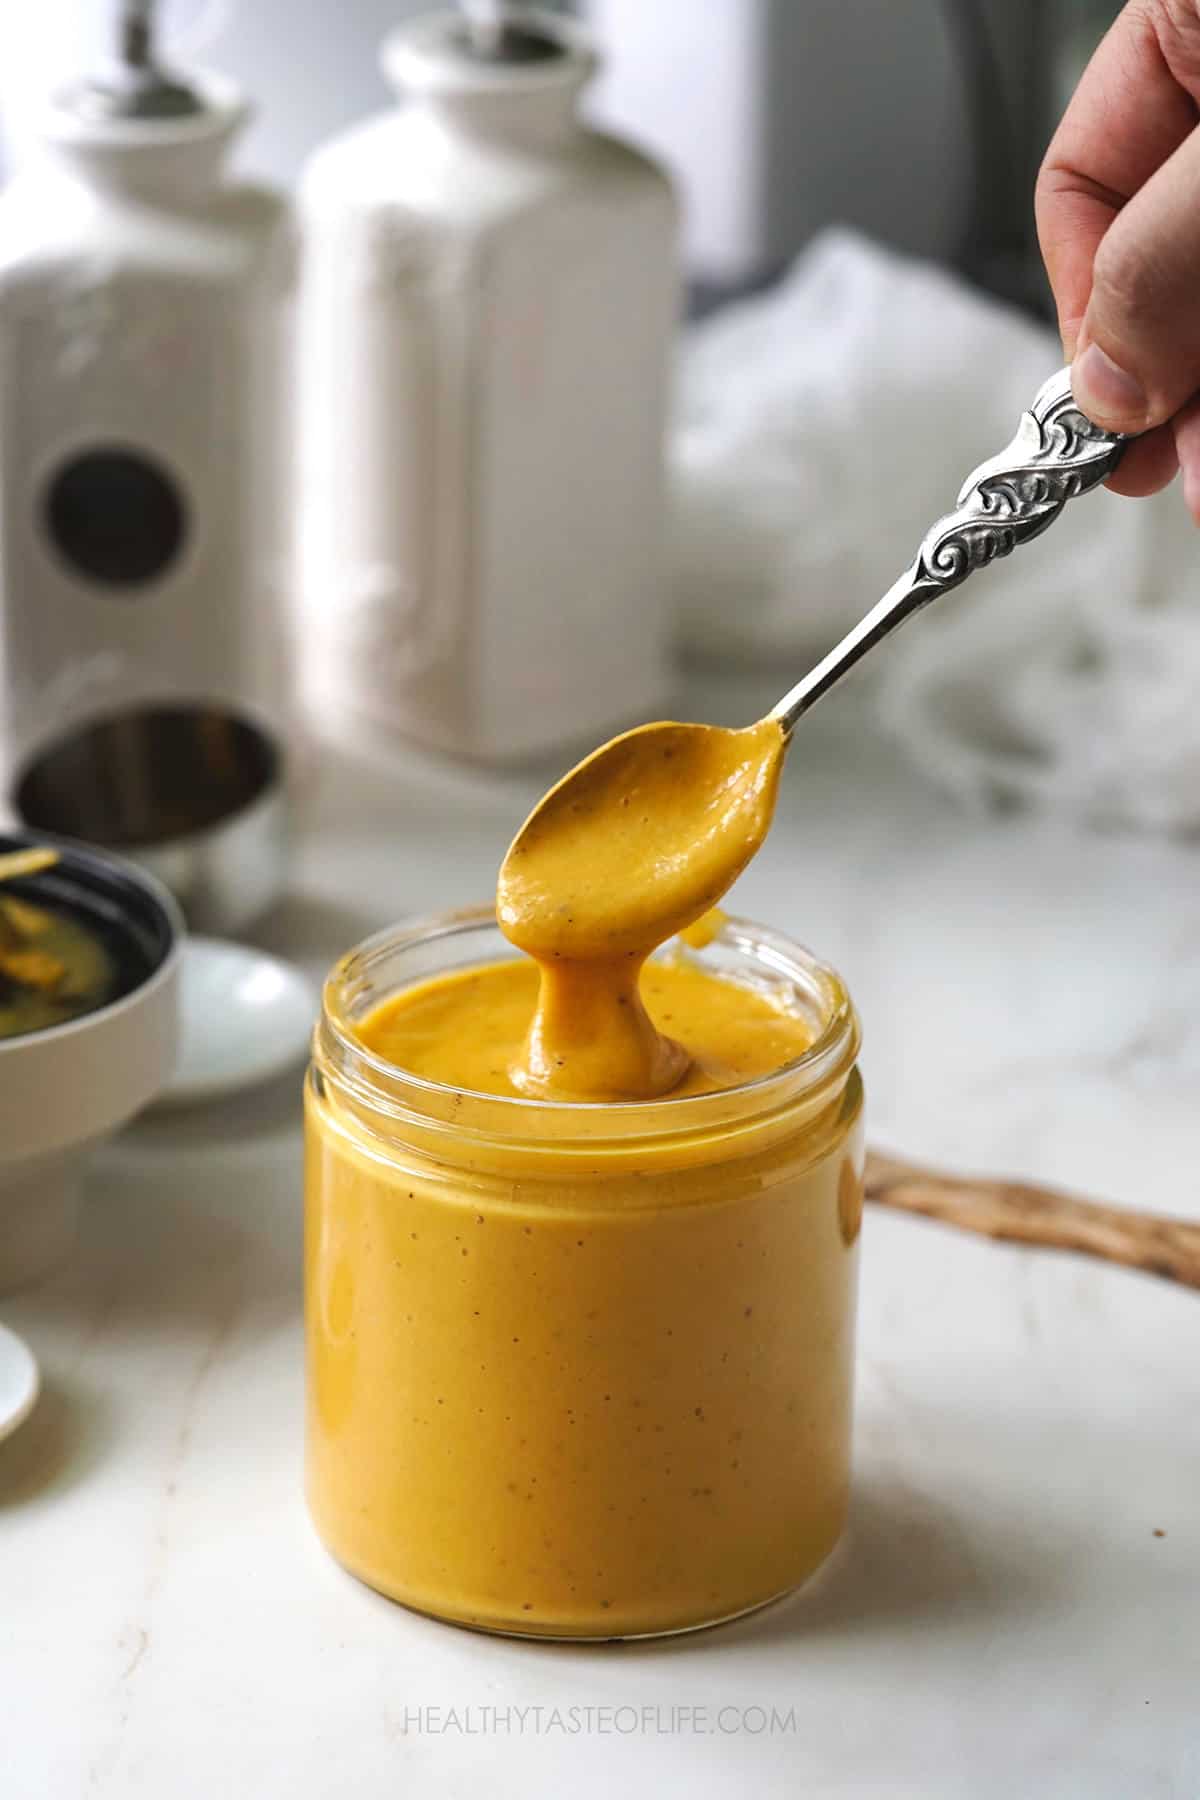 Mango sauce in a jar showing creaminess of texture with a dipping spoon.